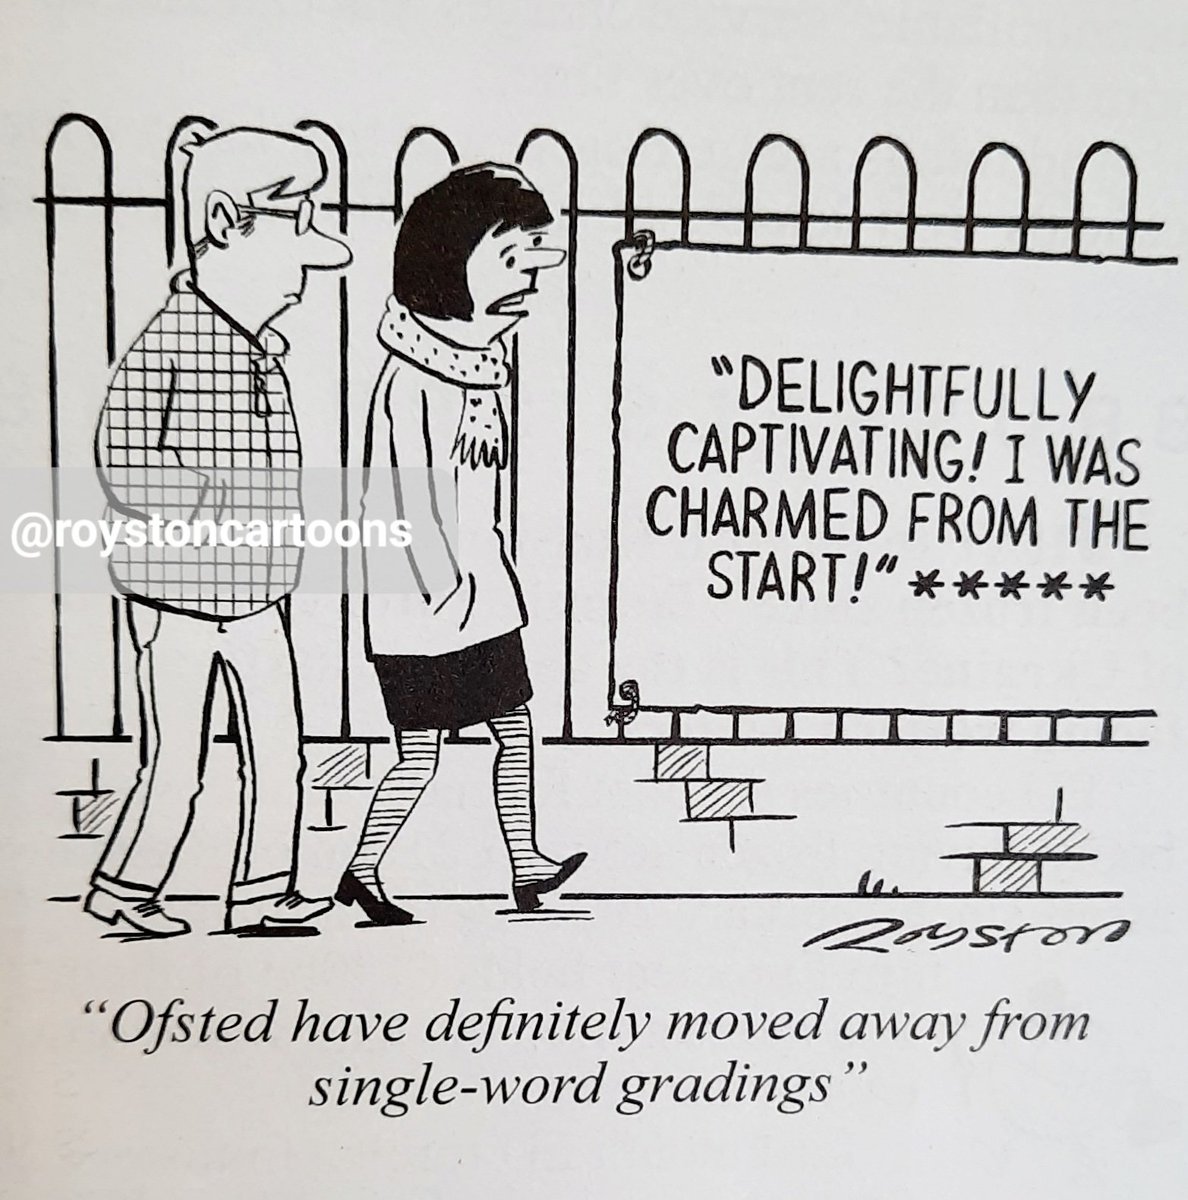 New Private Eye out today. Here's one of mine from the previous issue. #Ofsted #schools